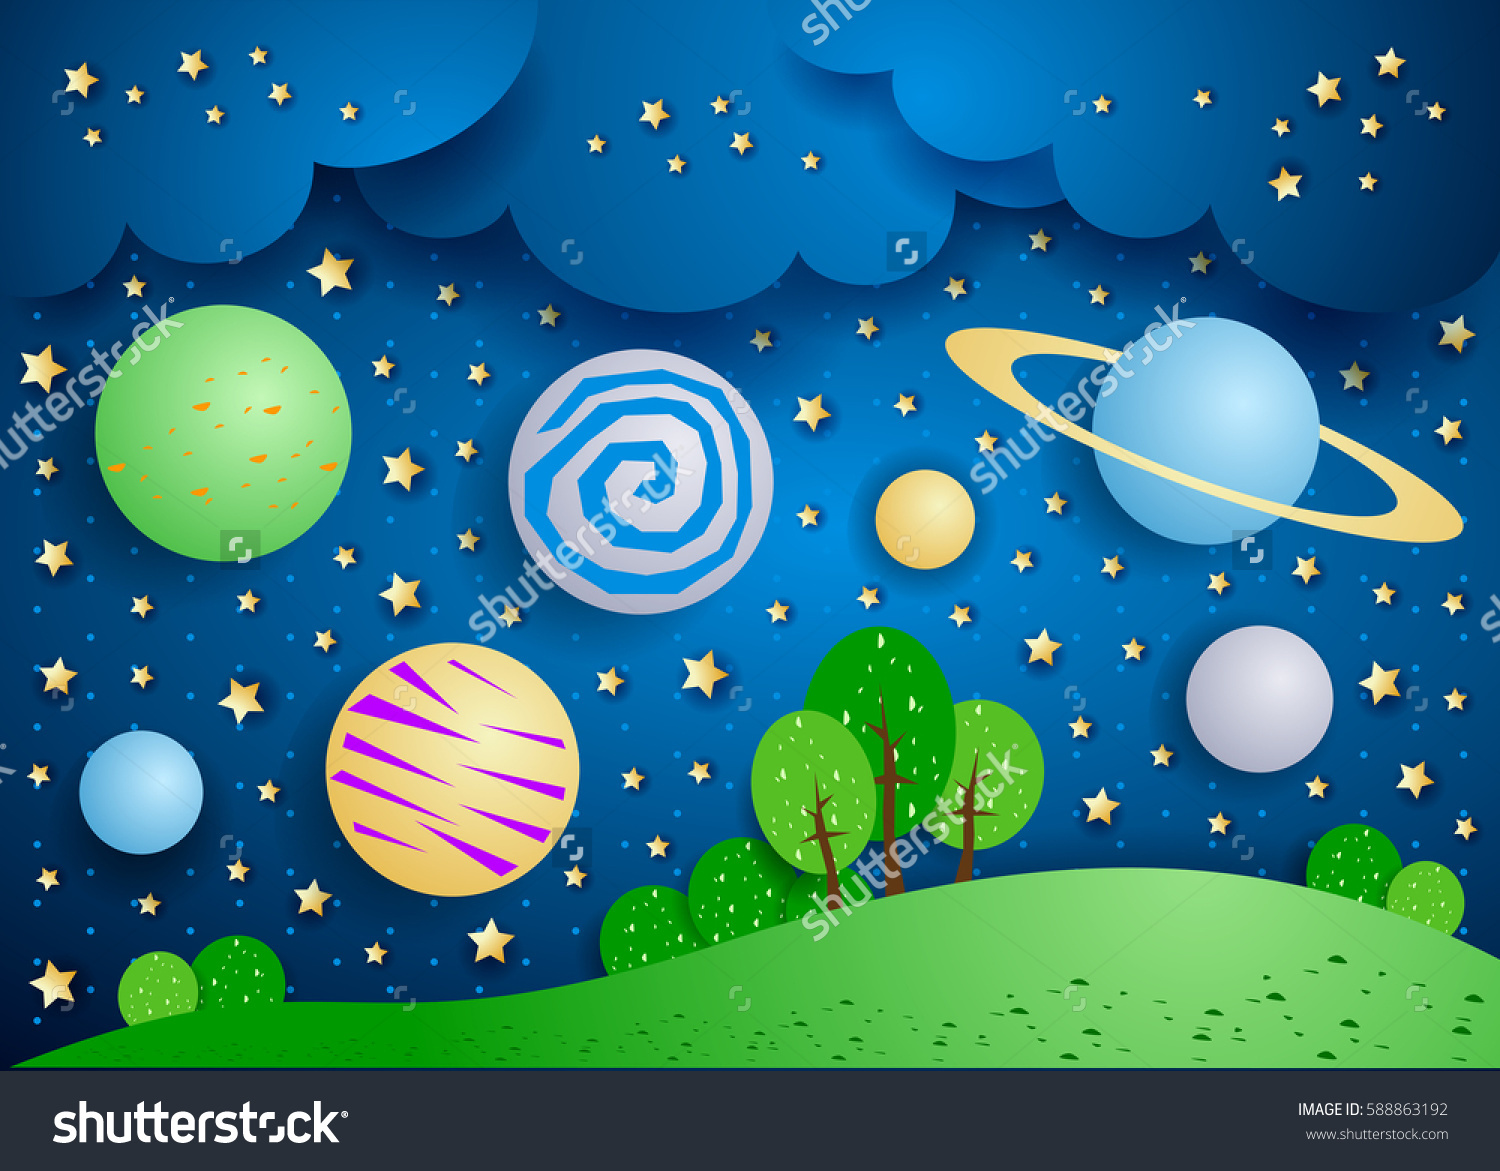 Surreal Planet Sky clipart #20, Download drawings